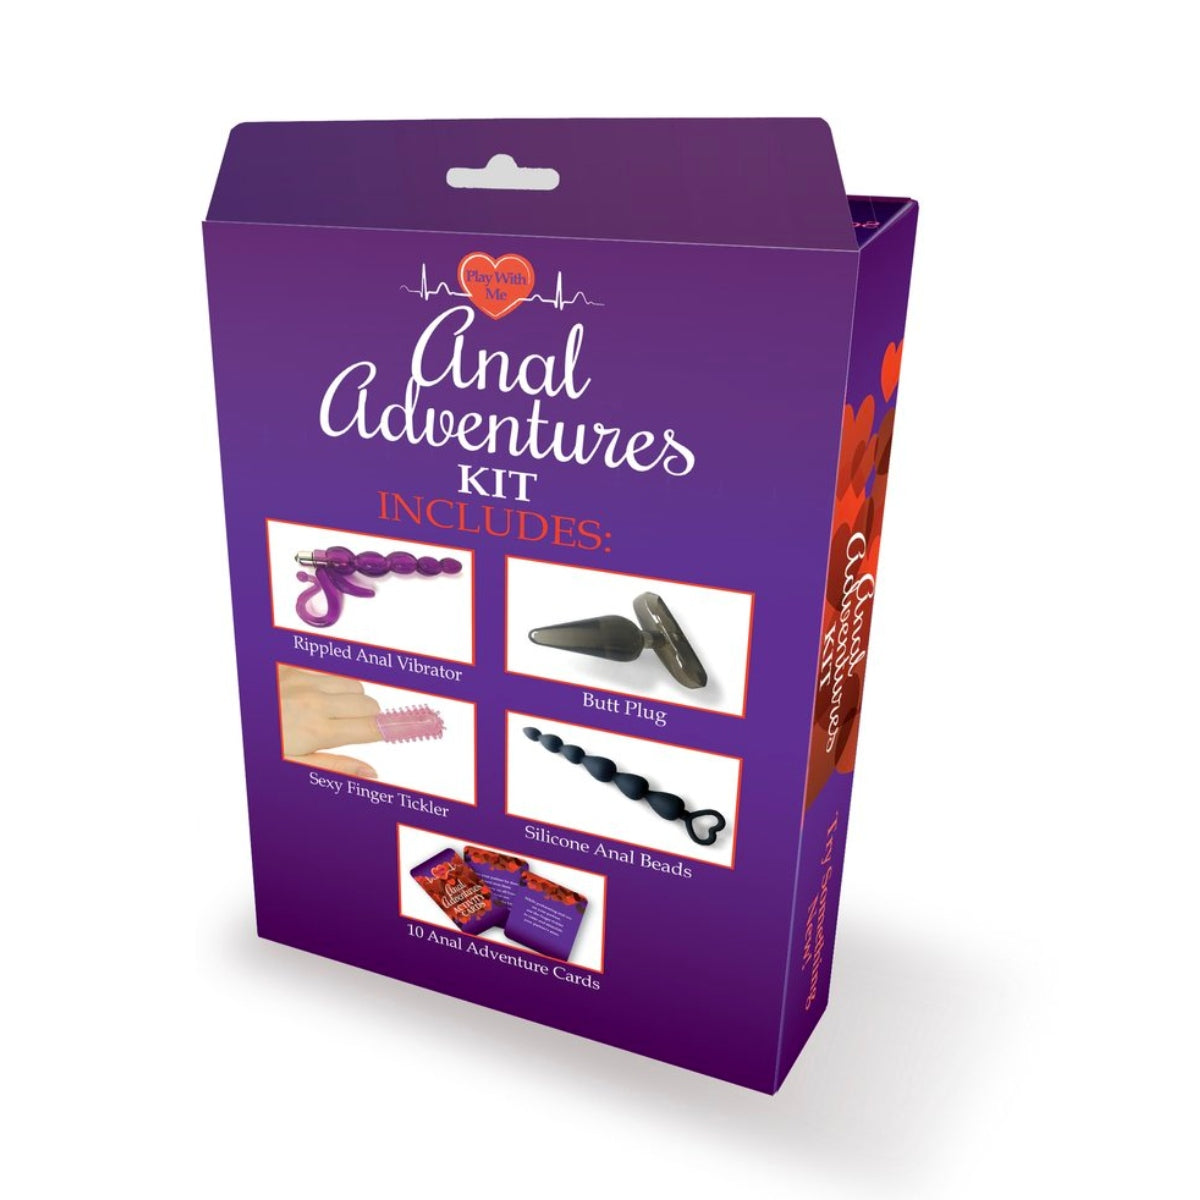 Little Genie Play With Me Anal Adventures Sex Toy Kit